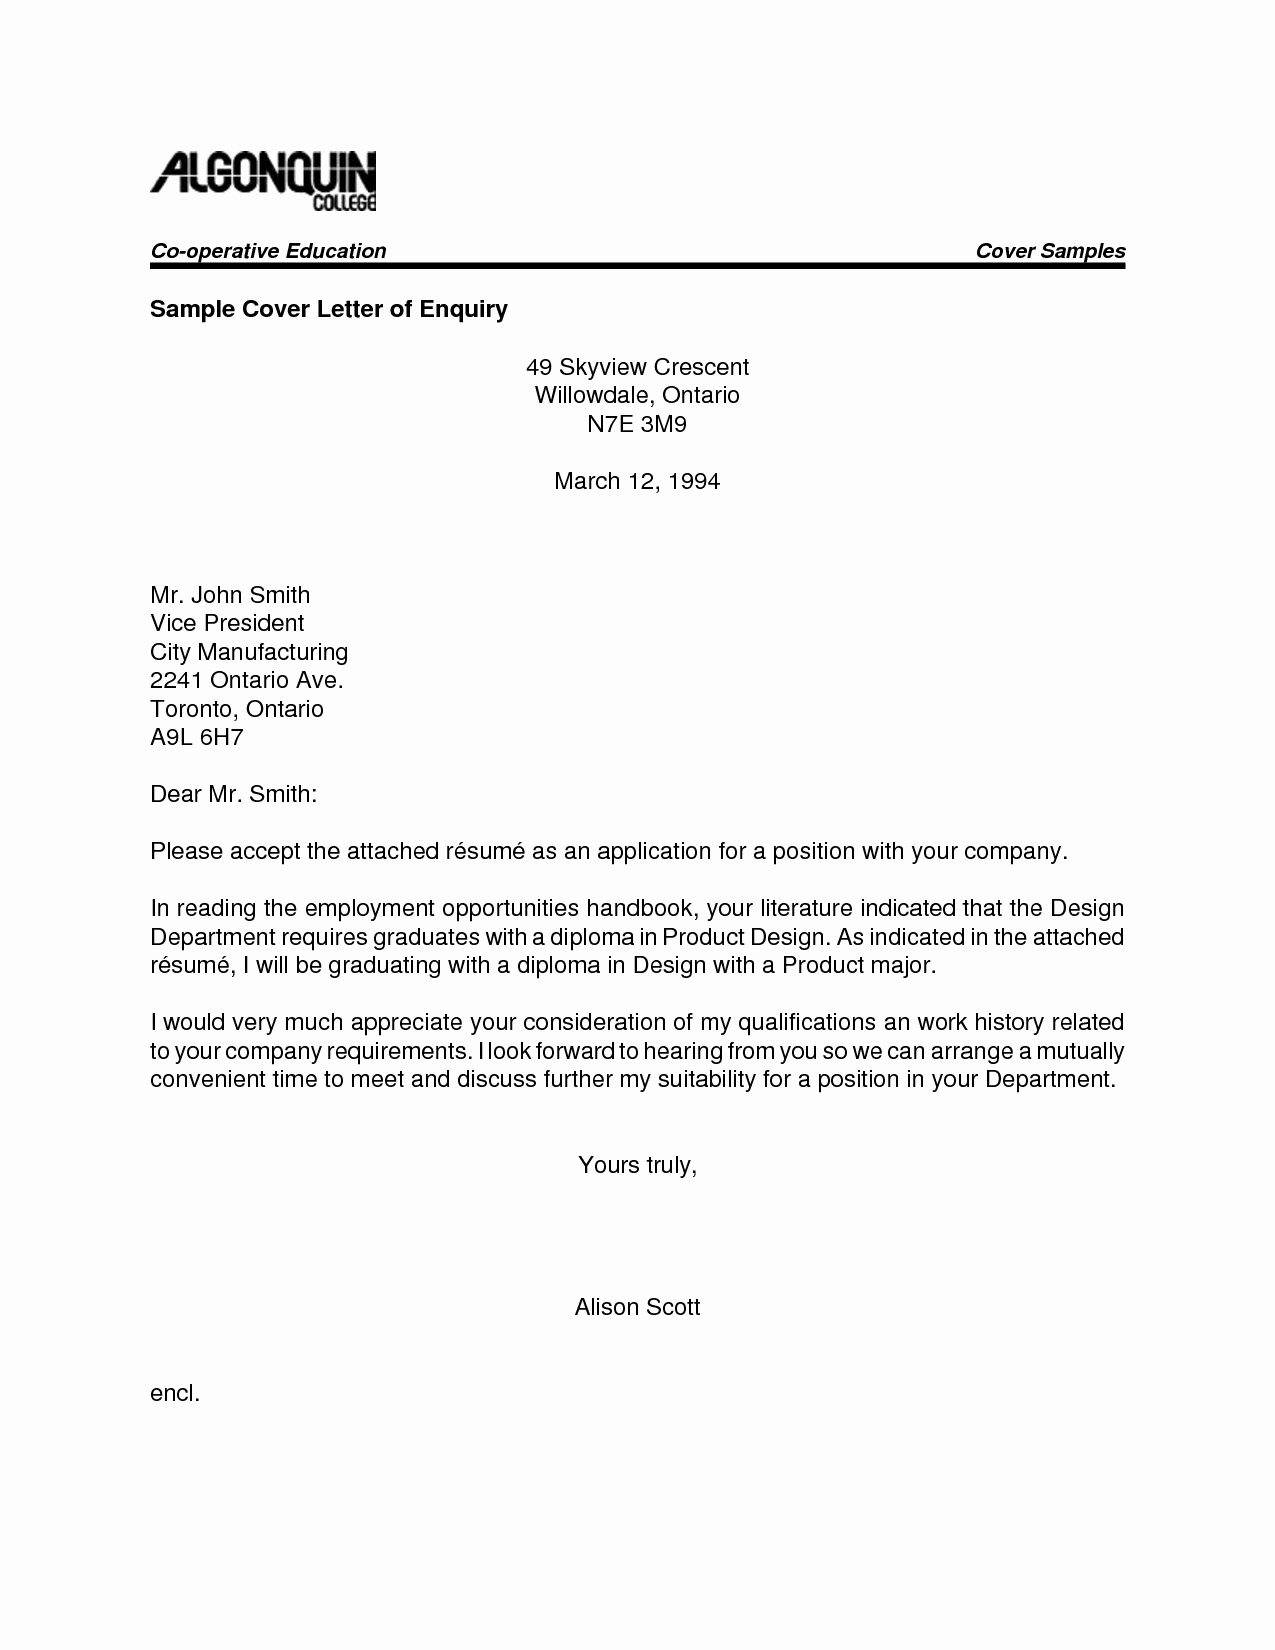 Physical Education Job Cover Letter